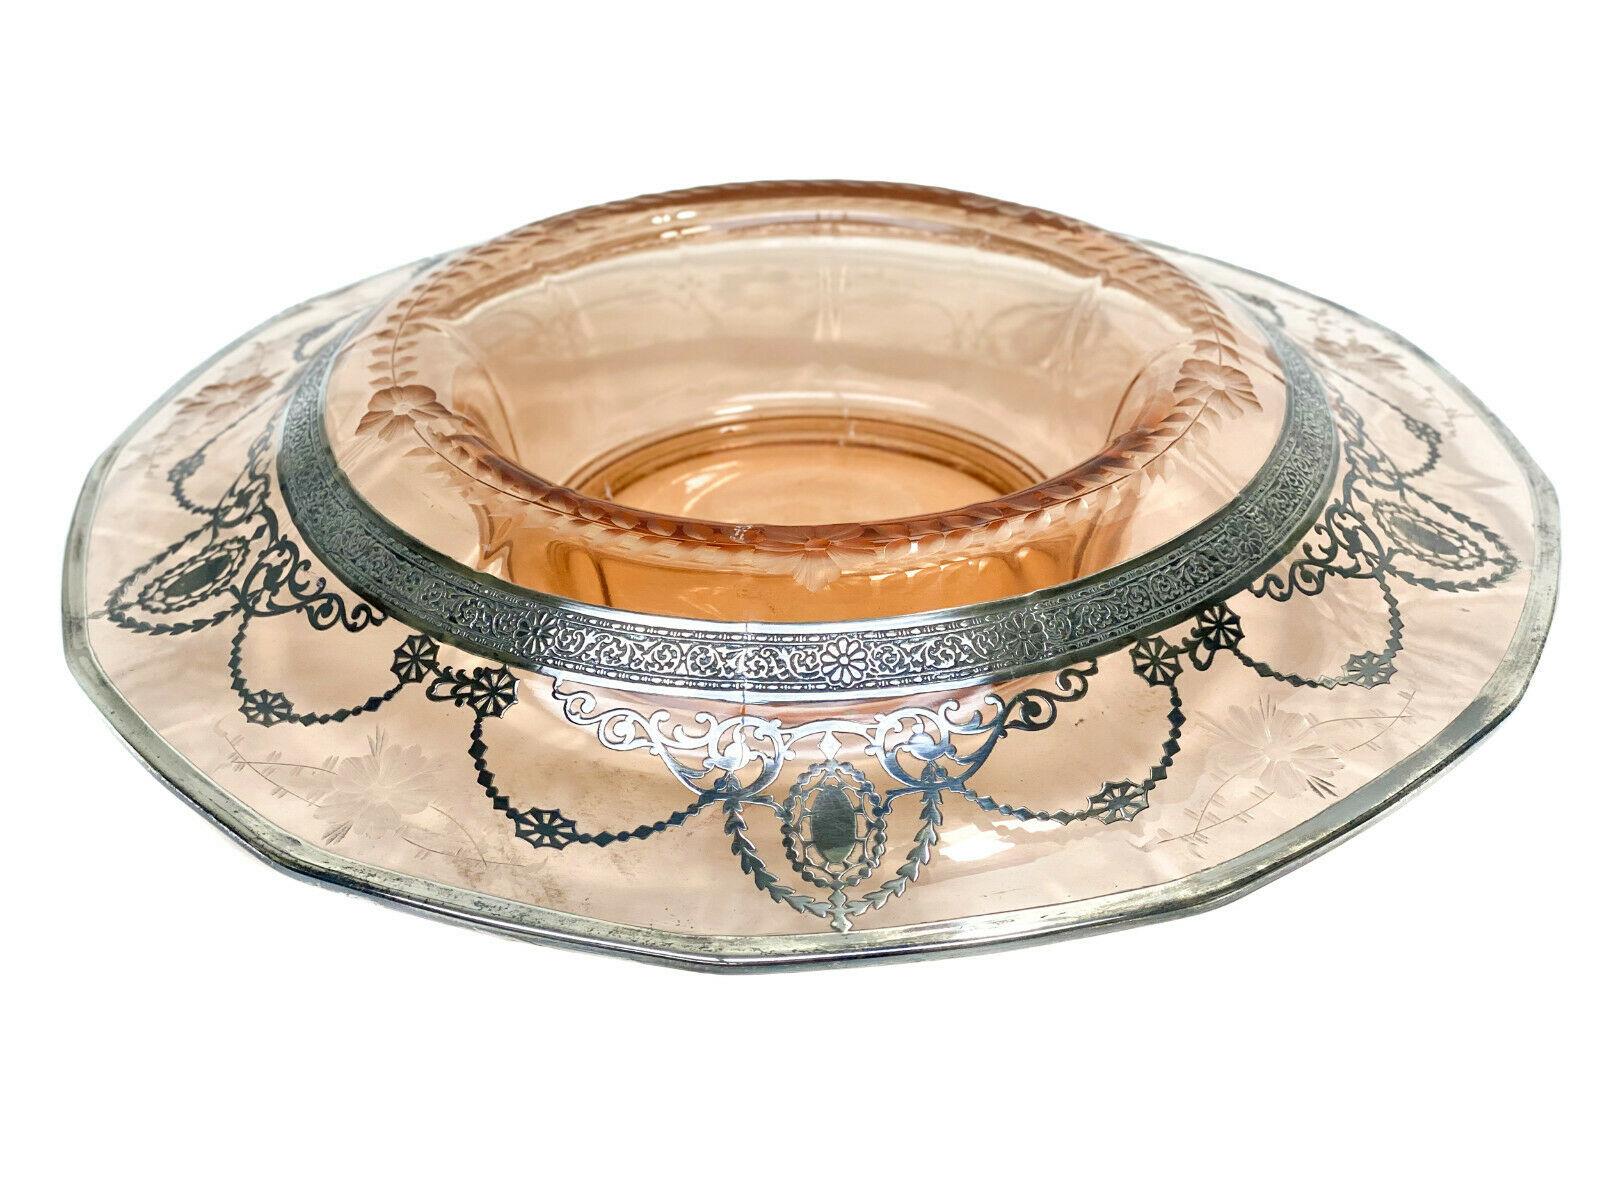 Bohemian or American Sterling Silver Overlay Coral Art Glass Centerpiece Bowl In Good Condition For Sale In Gardena, CA